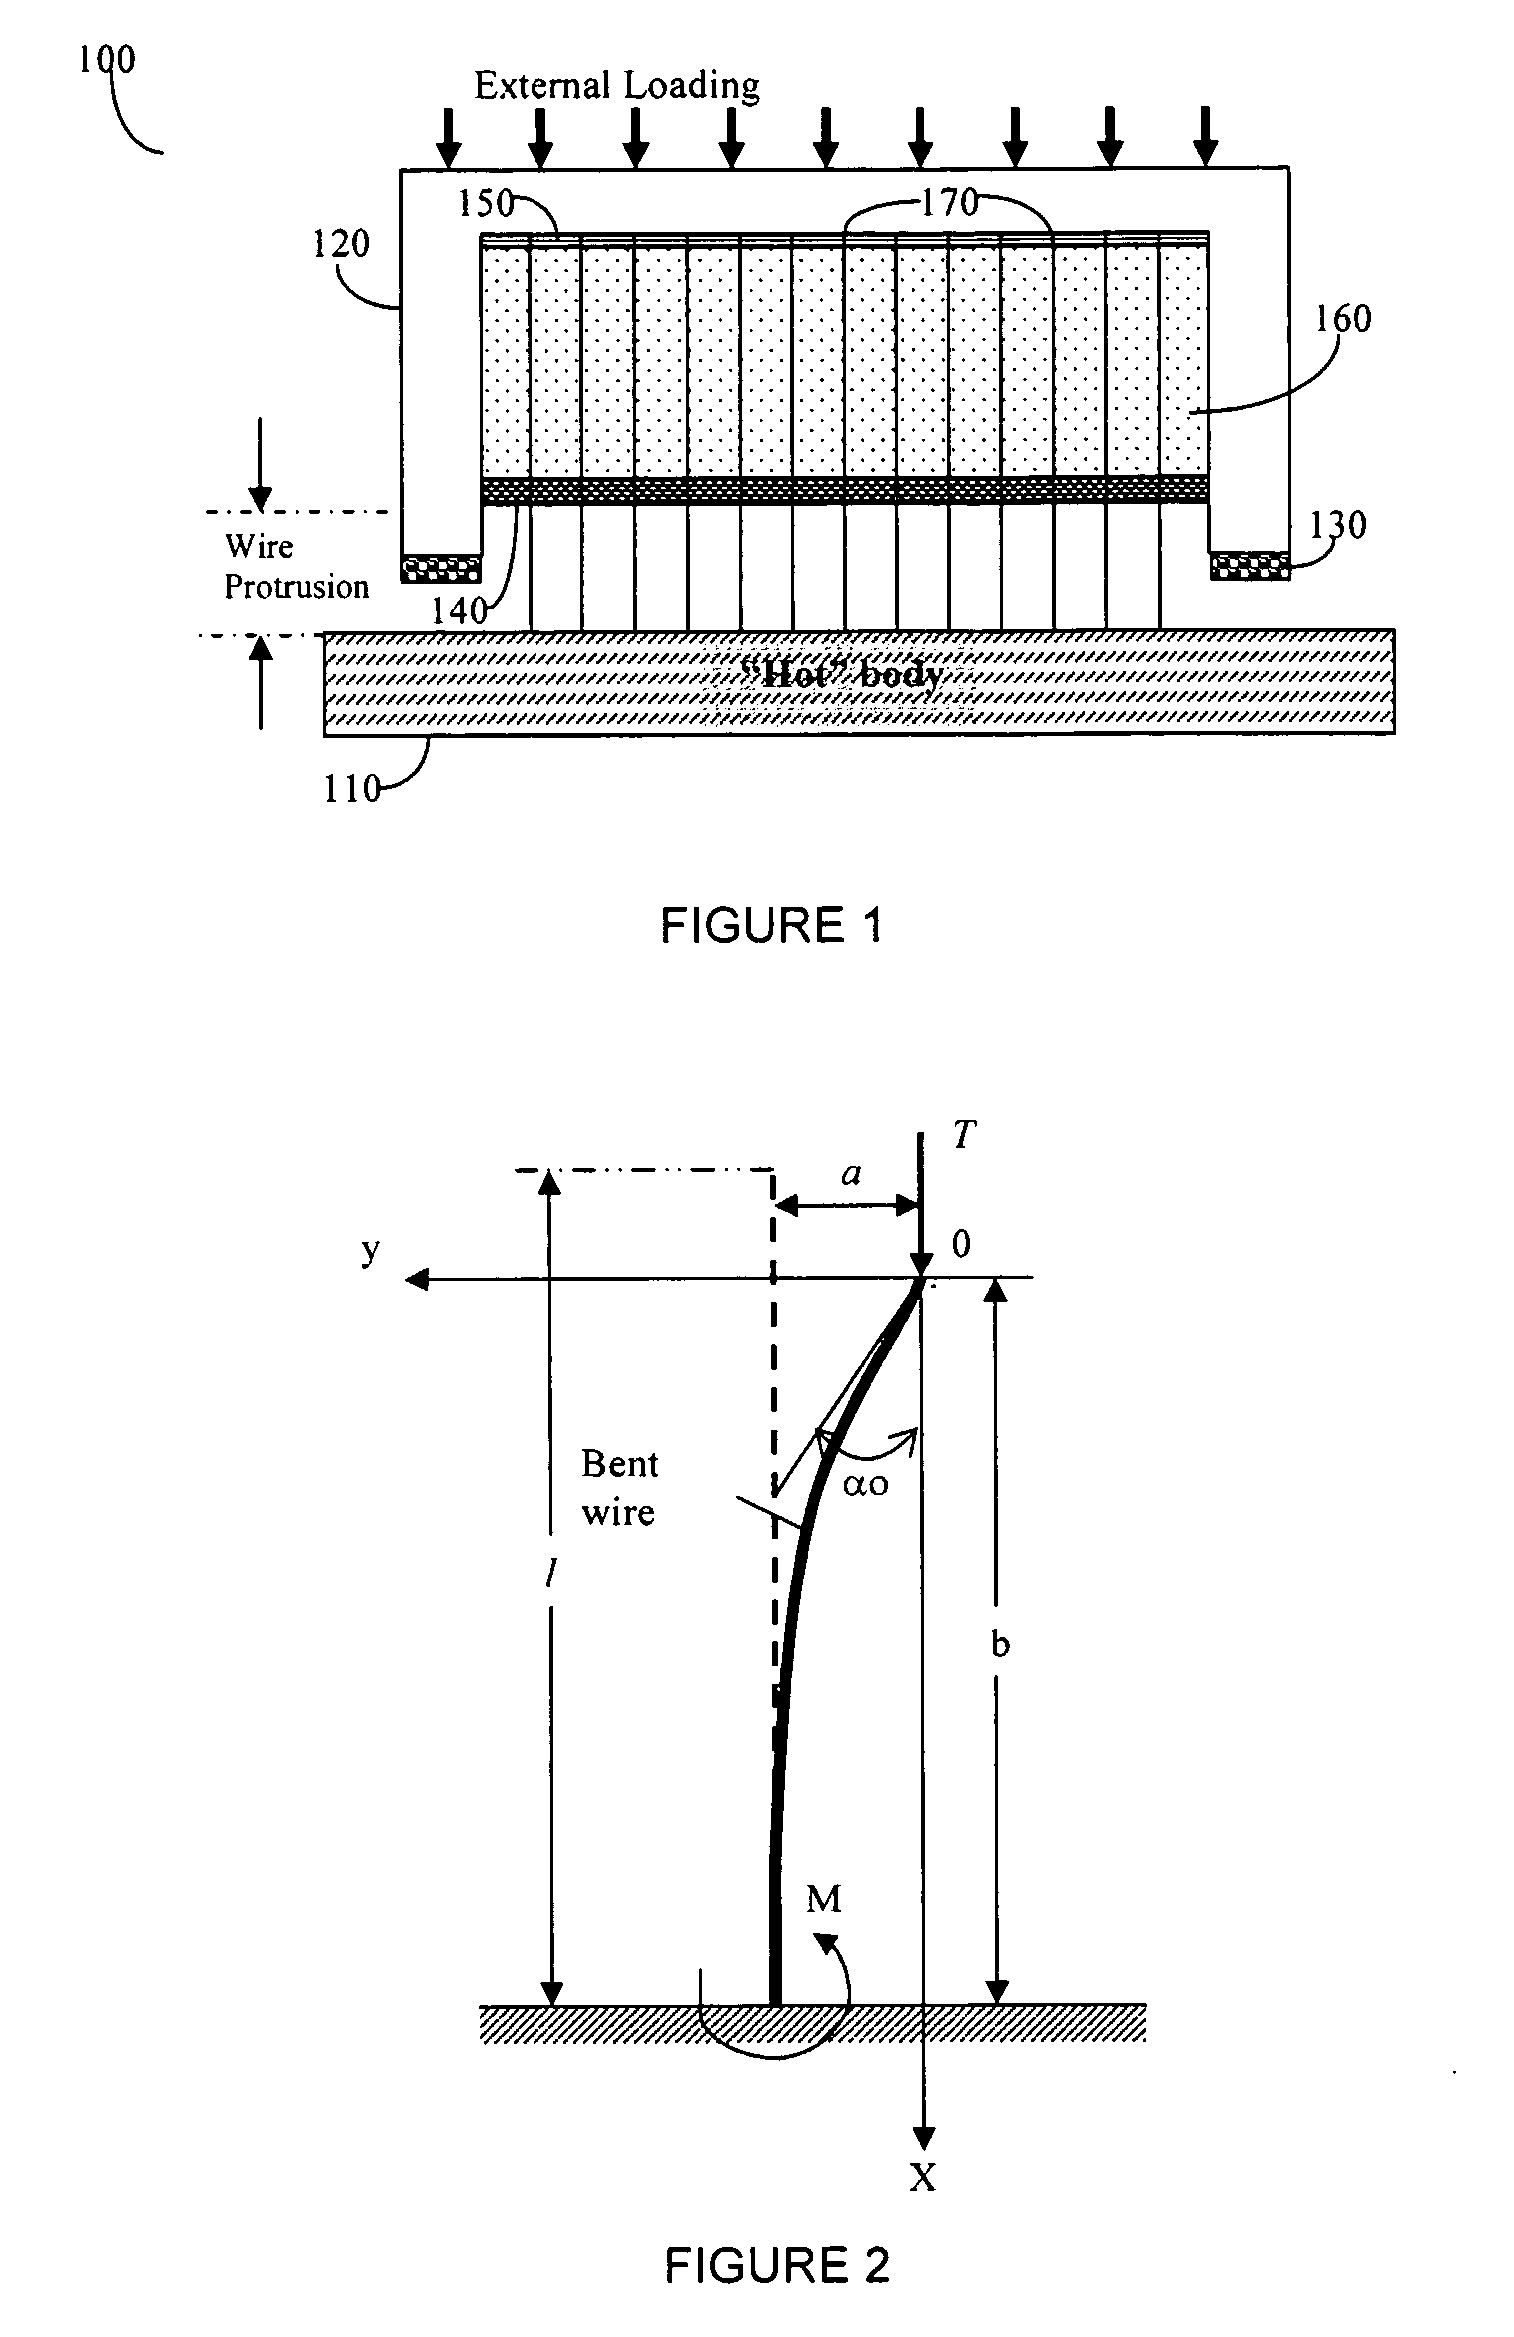 Apparatus and test device for the application and measurement of prescribed, predicted and controlled contact pressure on wires